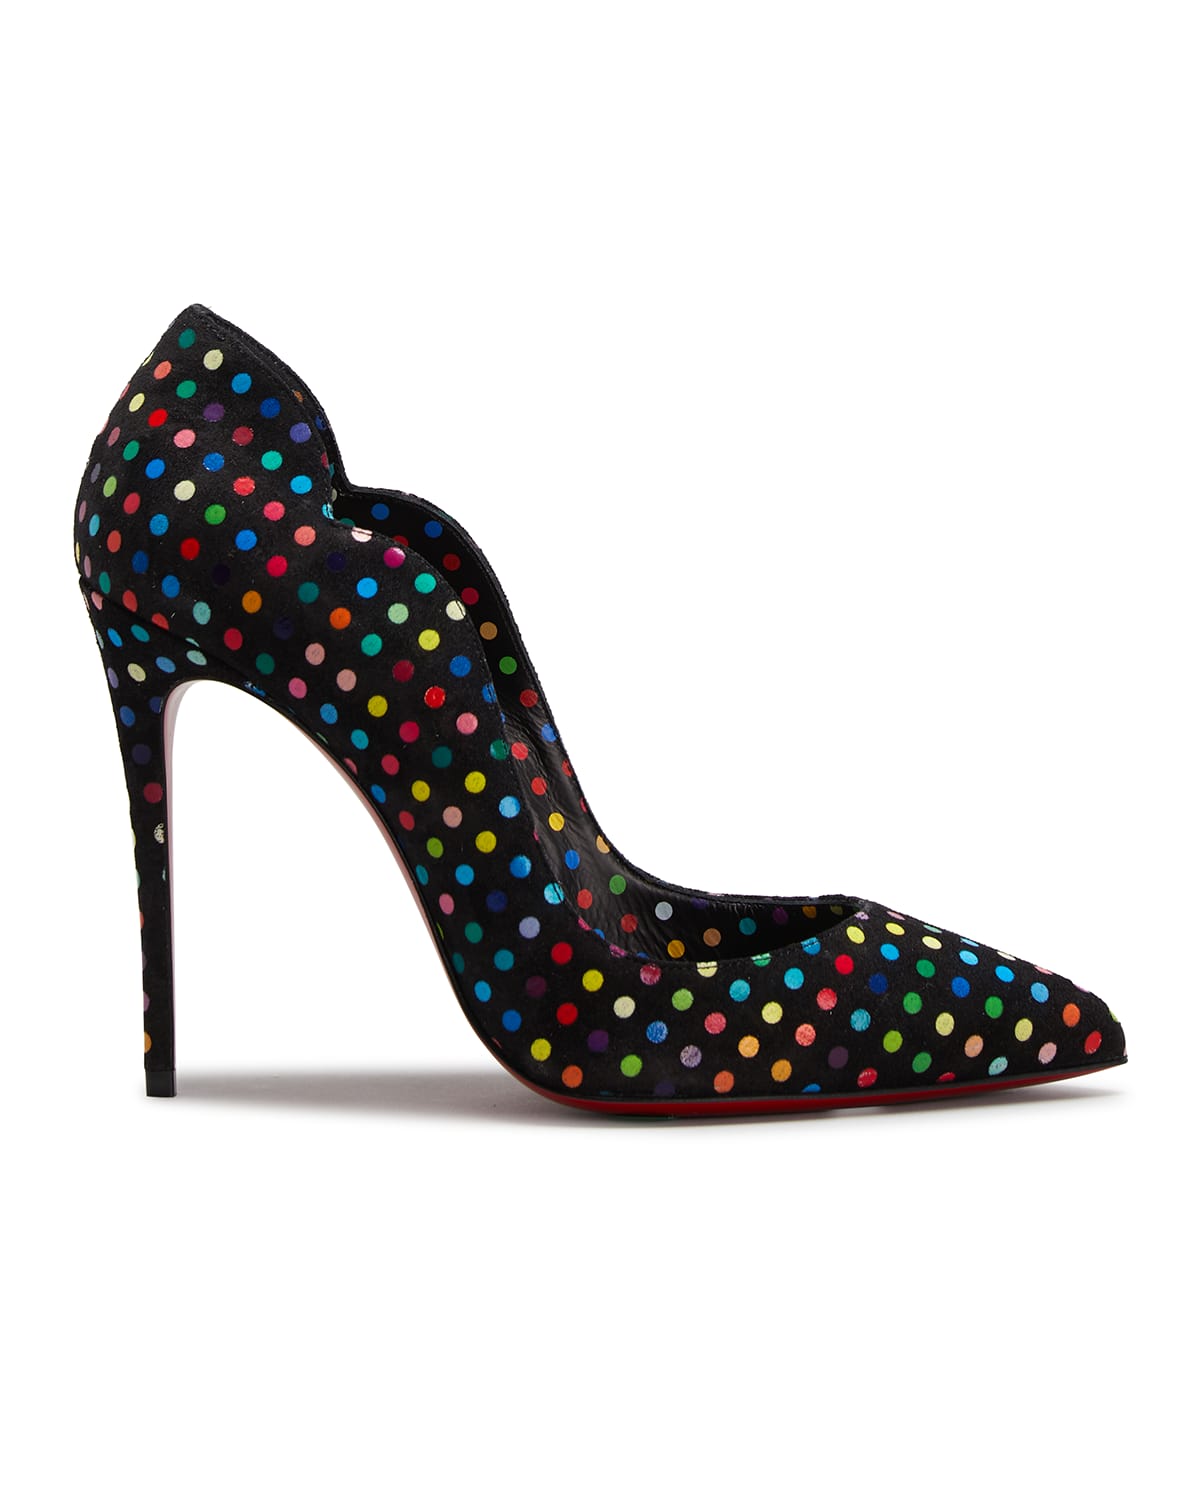 Christian Louboutin Hot Chick Red Sole Polka-Dot Suede Pumps